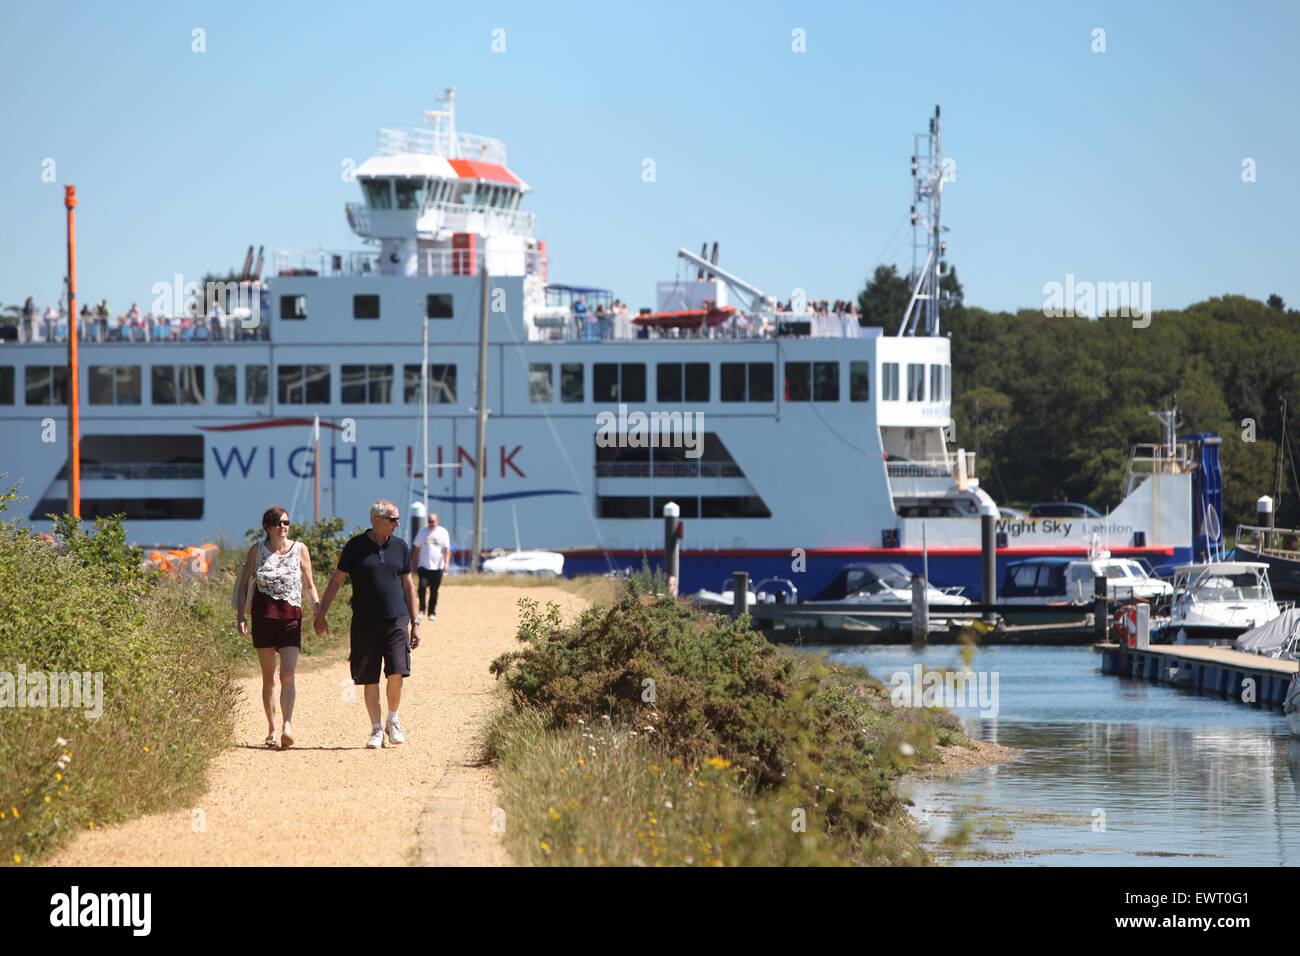 Walkers on the Solent Way between Lymington and Keyhaven with the Wight Link ferry passing in the background Stock Photo